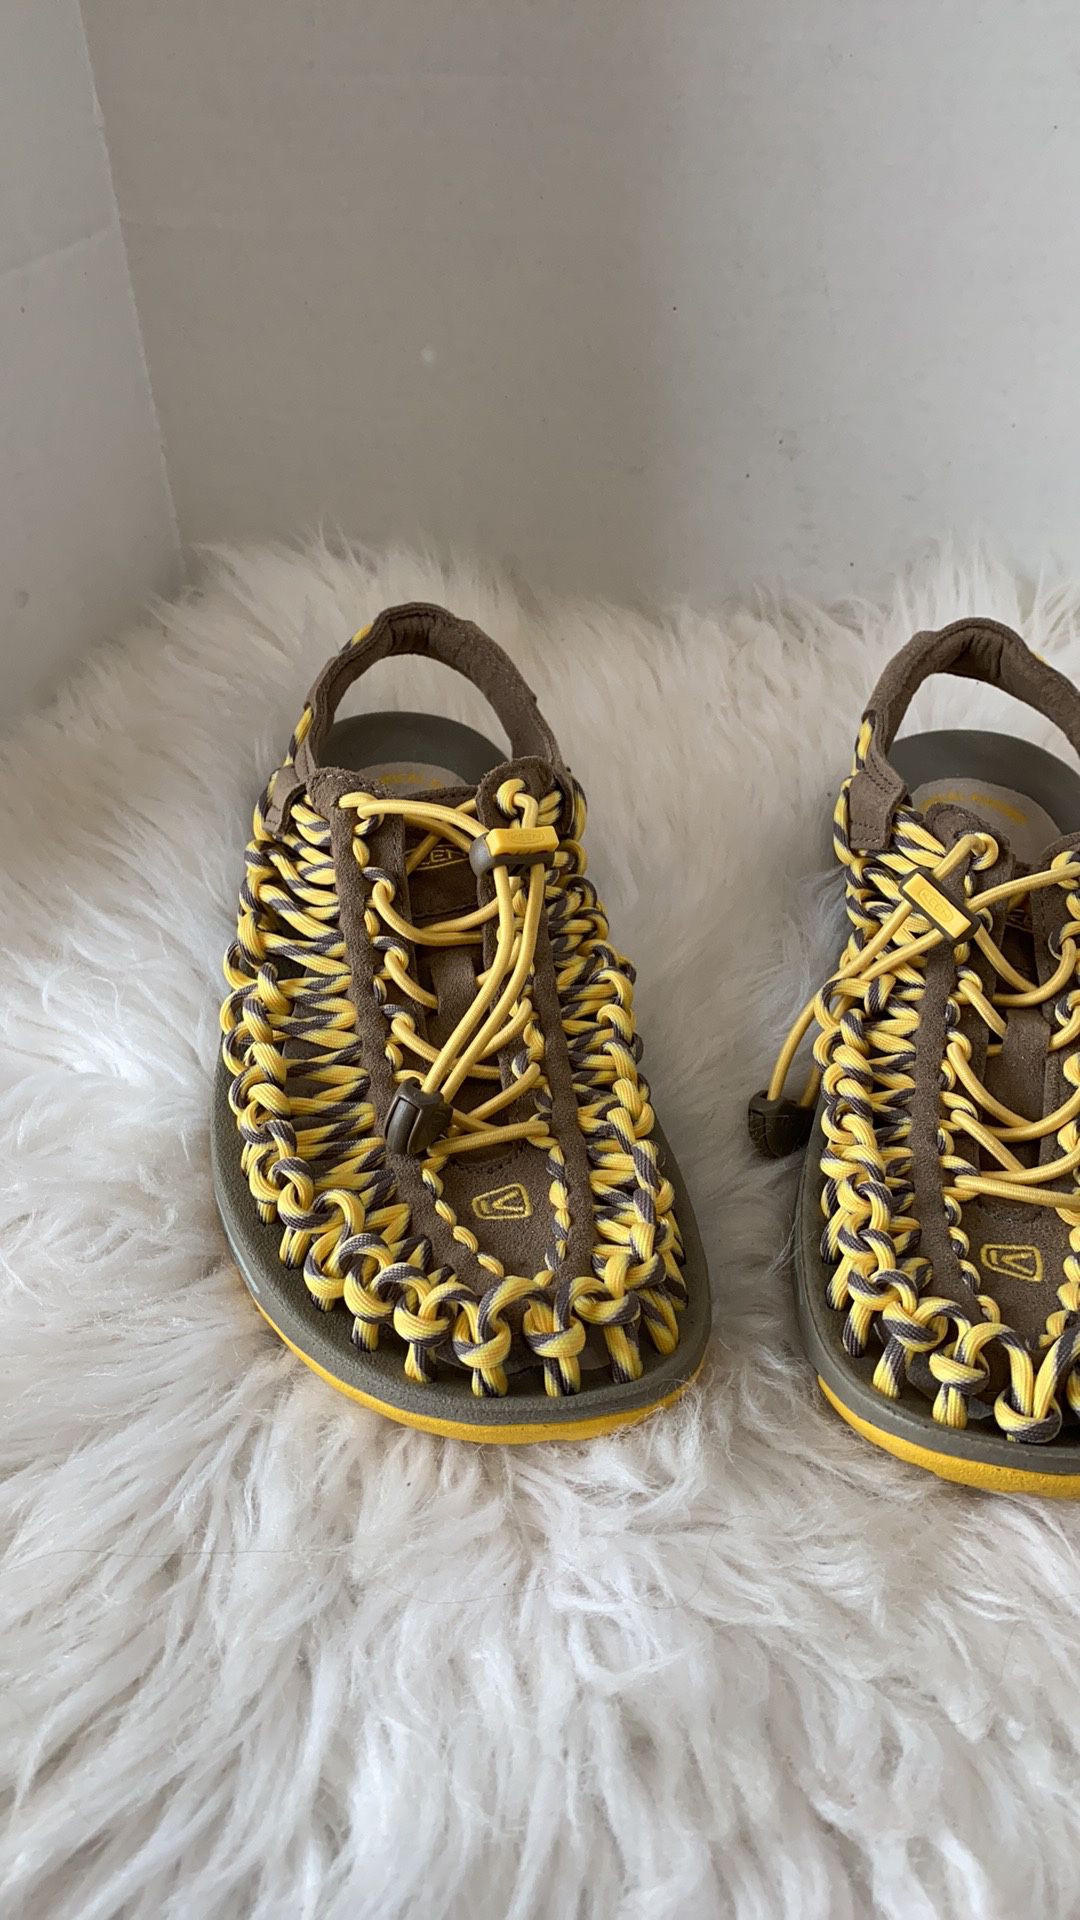 KEEN UNEEK Woven Paracord String Women's Sandals Sporty Shoes 6.5 Yellow / Grey